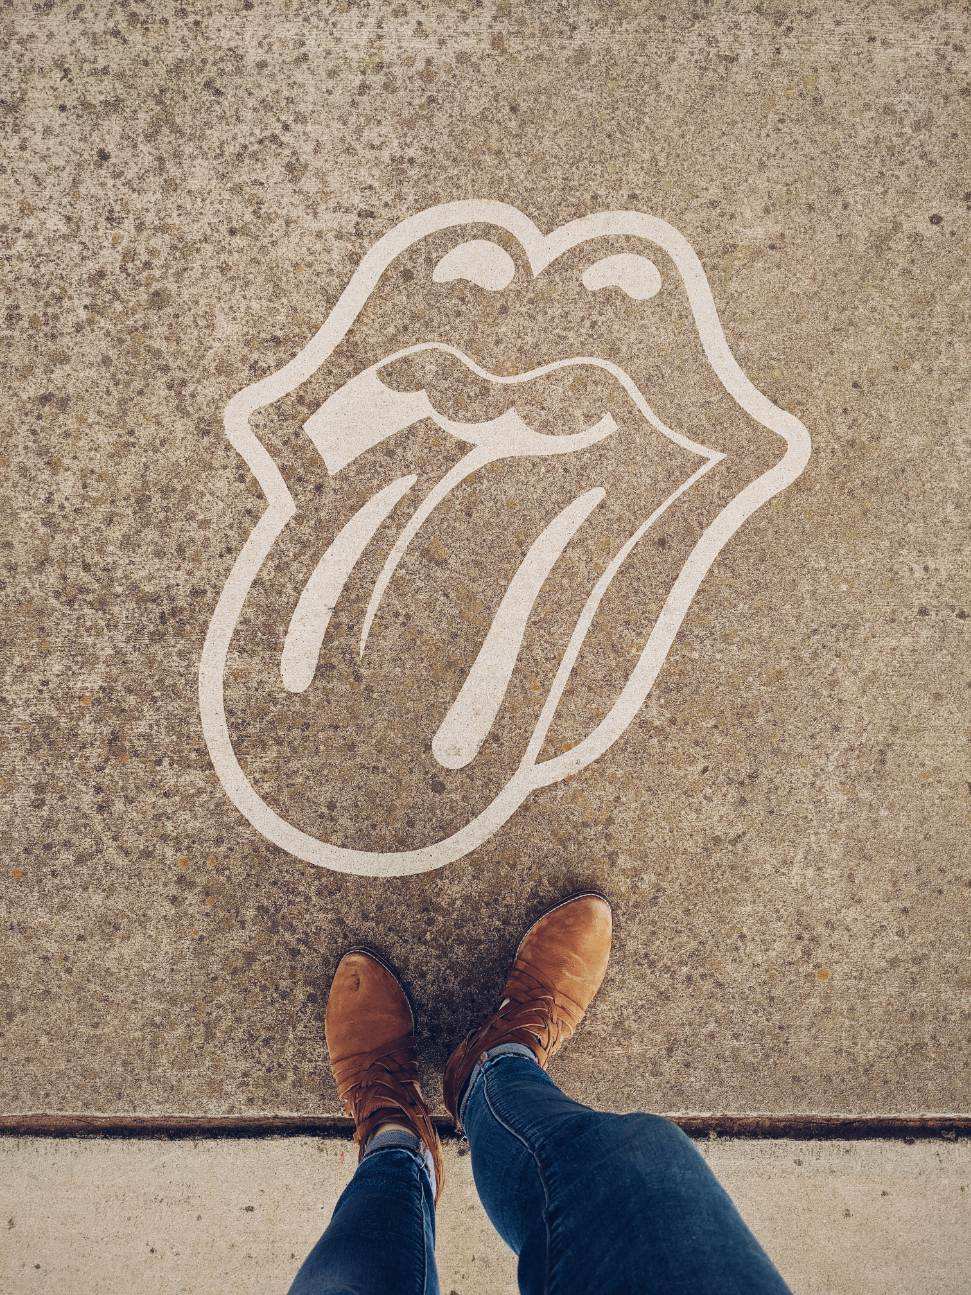 Clean Graffiti for The Rolling Stones